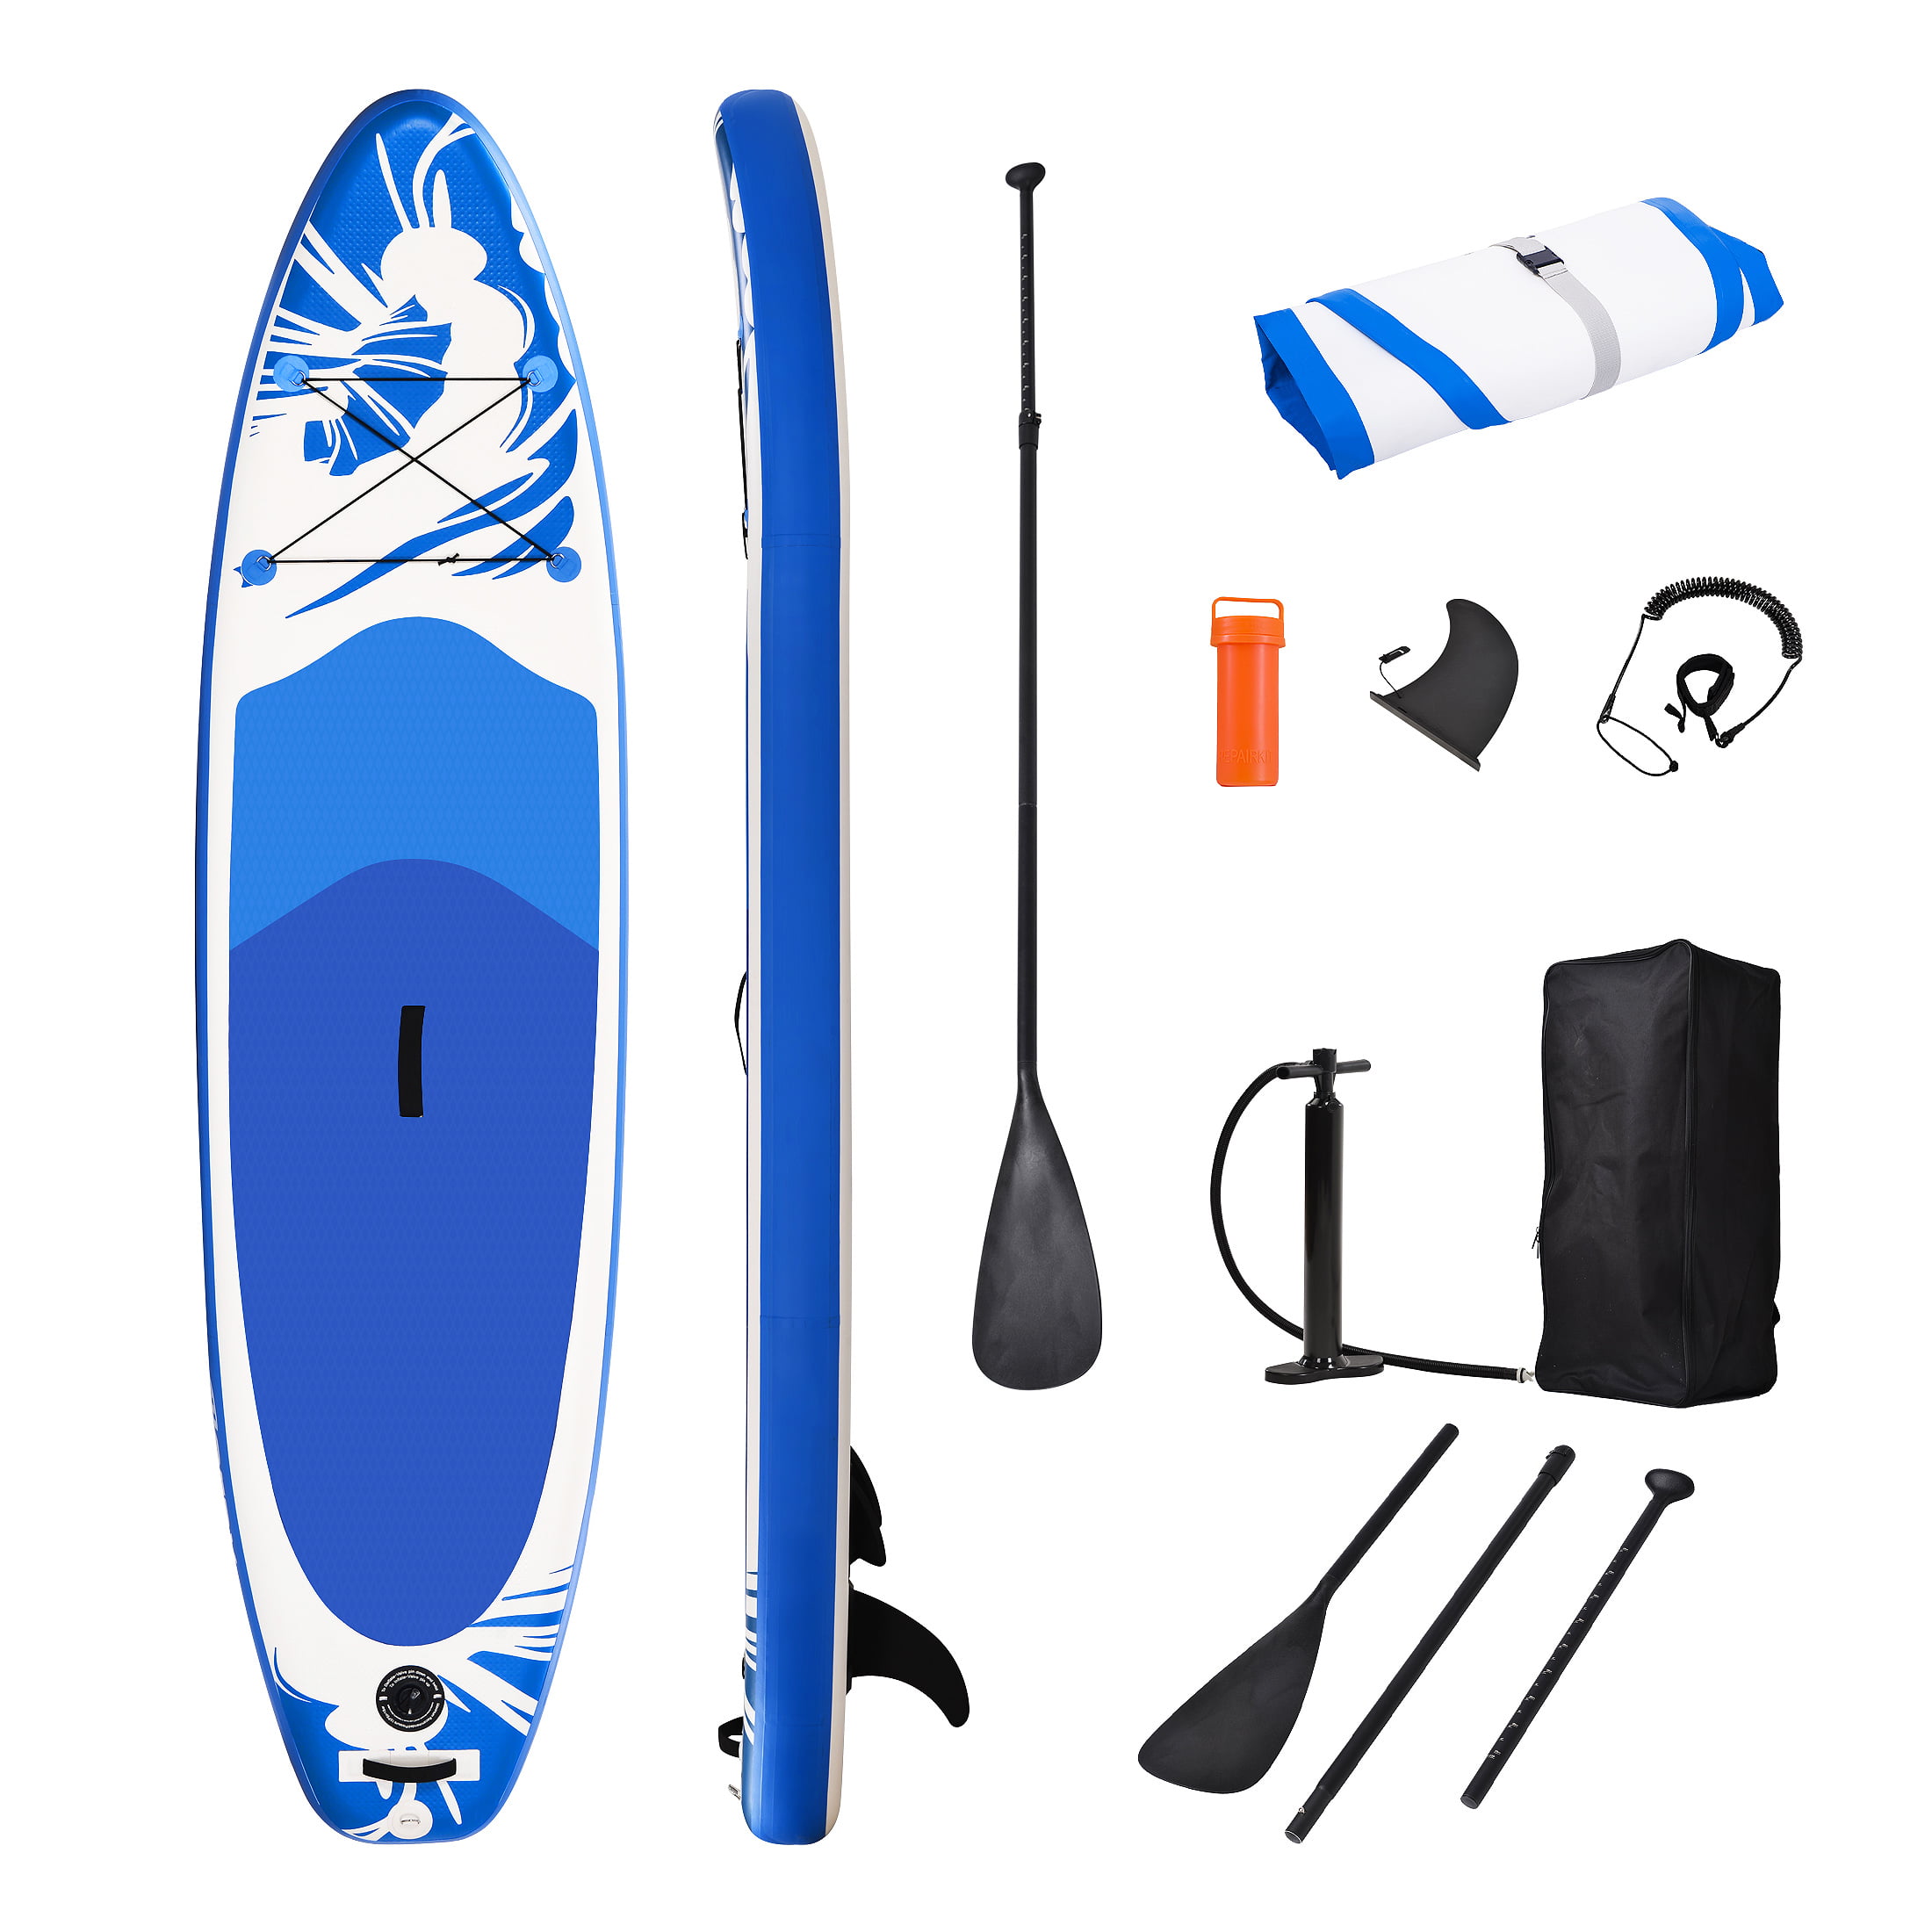 SKYLAND Inflatable Stand Up Paddle Board with Premium Non-slip Deck, Hand Pump and Backpack